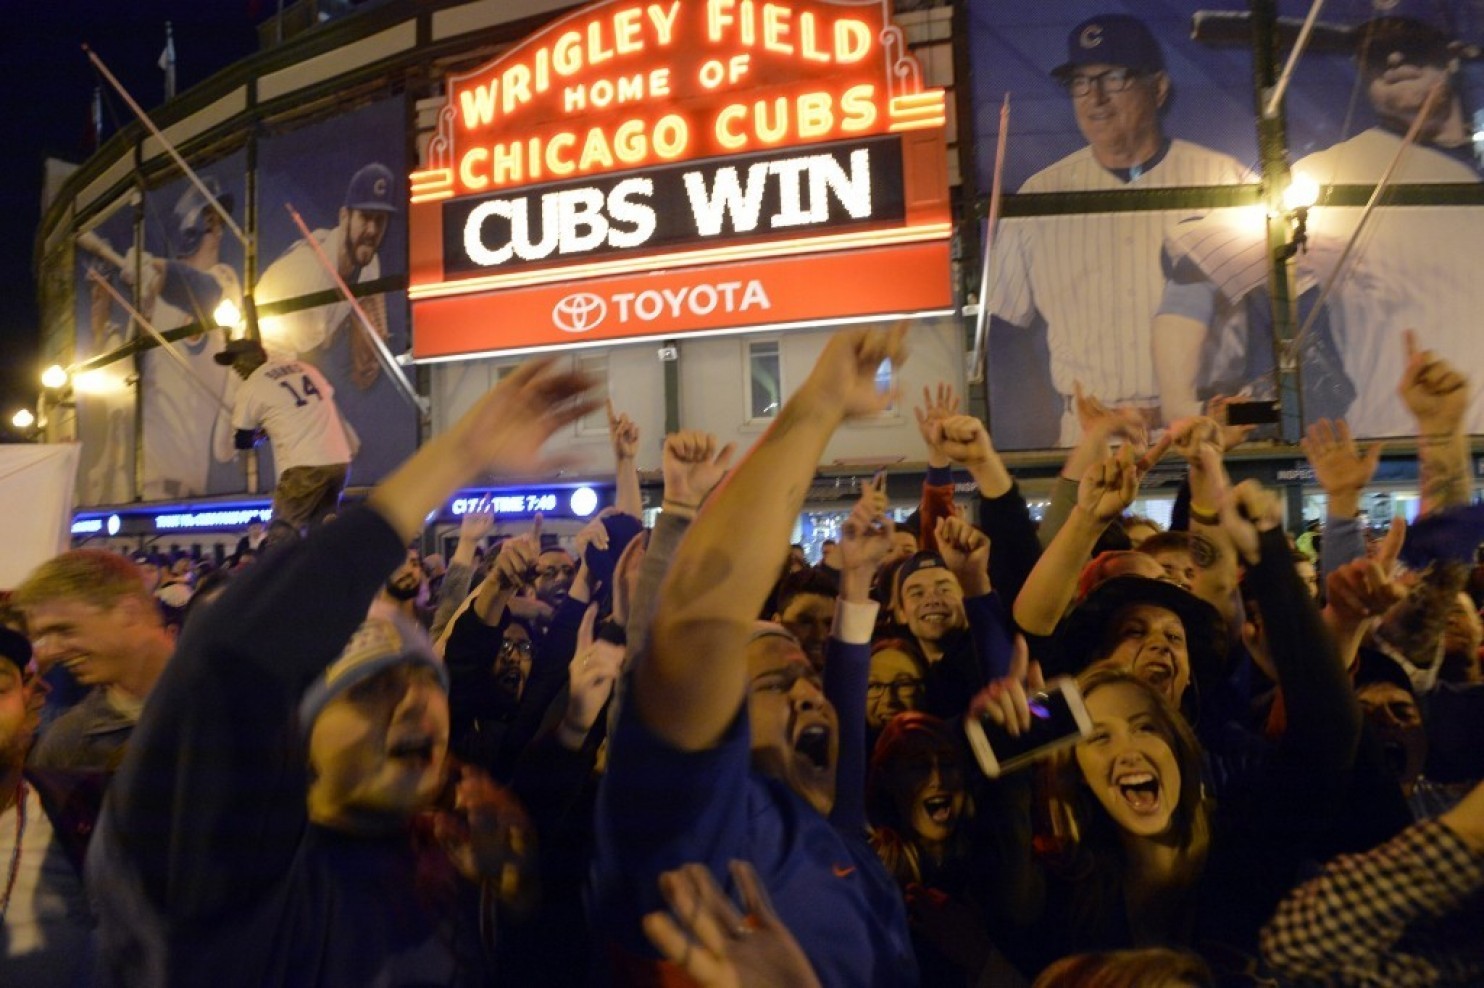 What curse? Cubs are Vegas favorite to win the World Series.